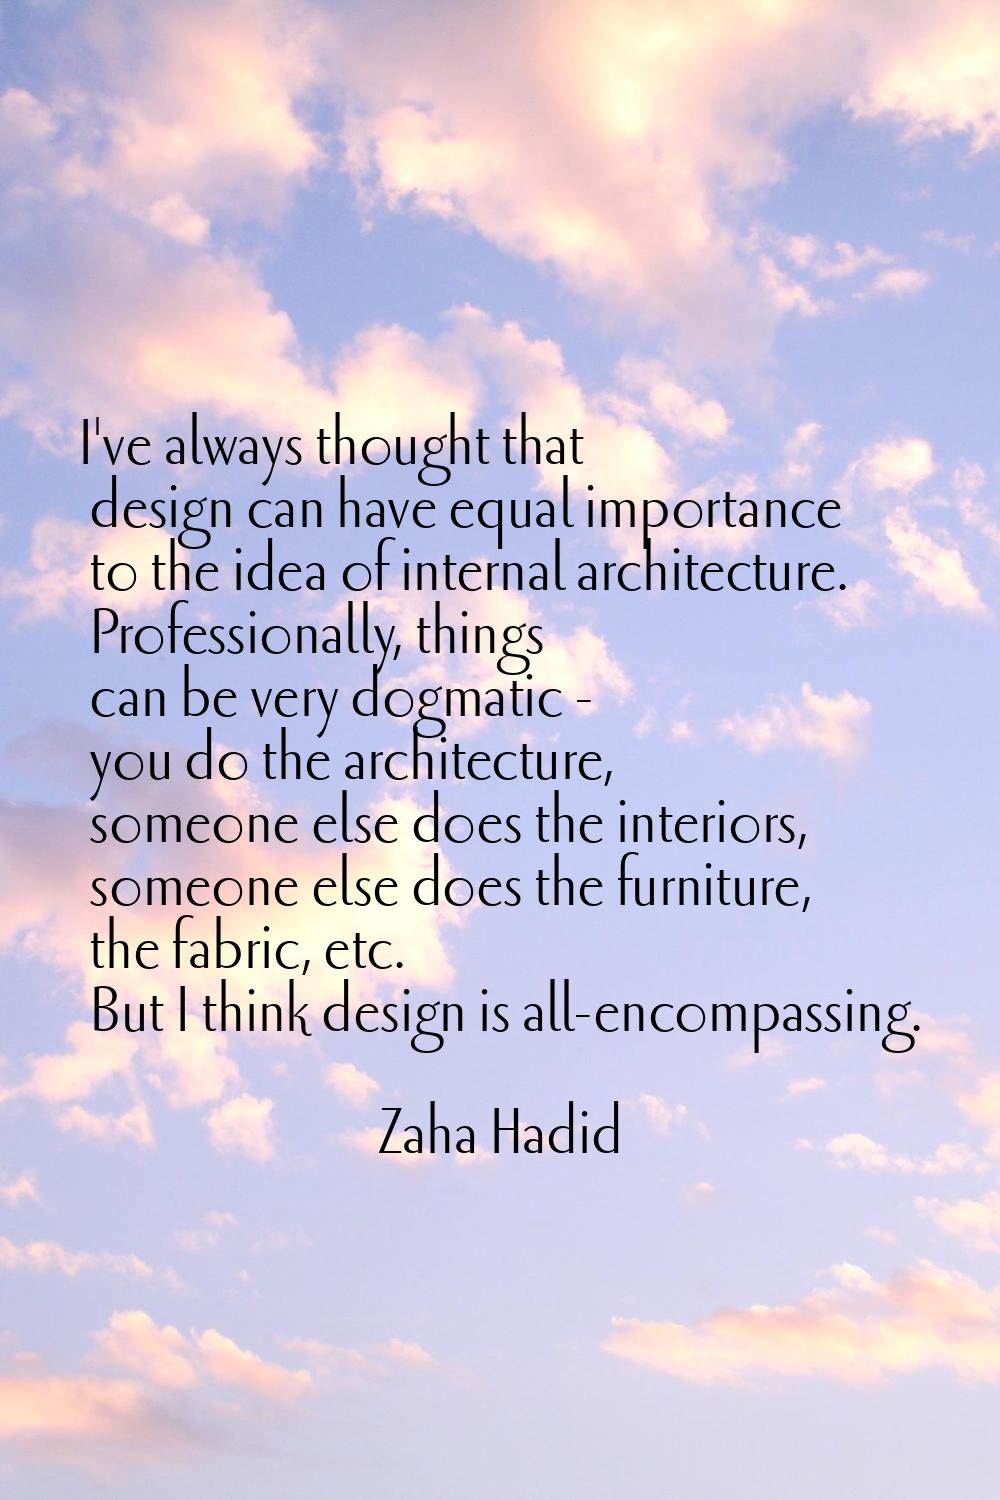 I've always thought that design can have equal importance to the idea of internal architecture. Pro